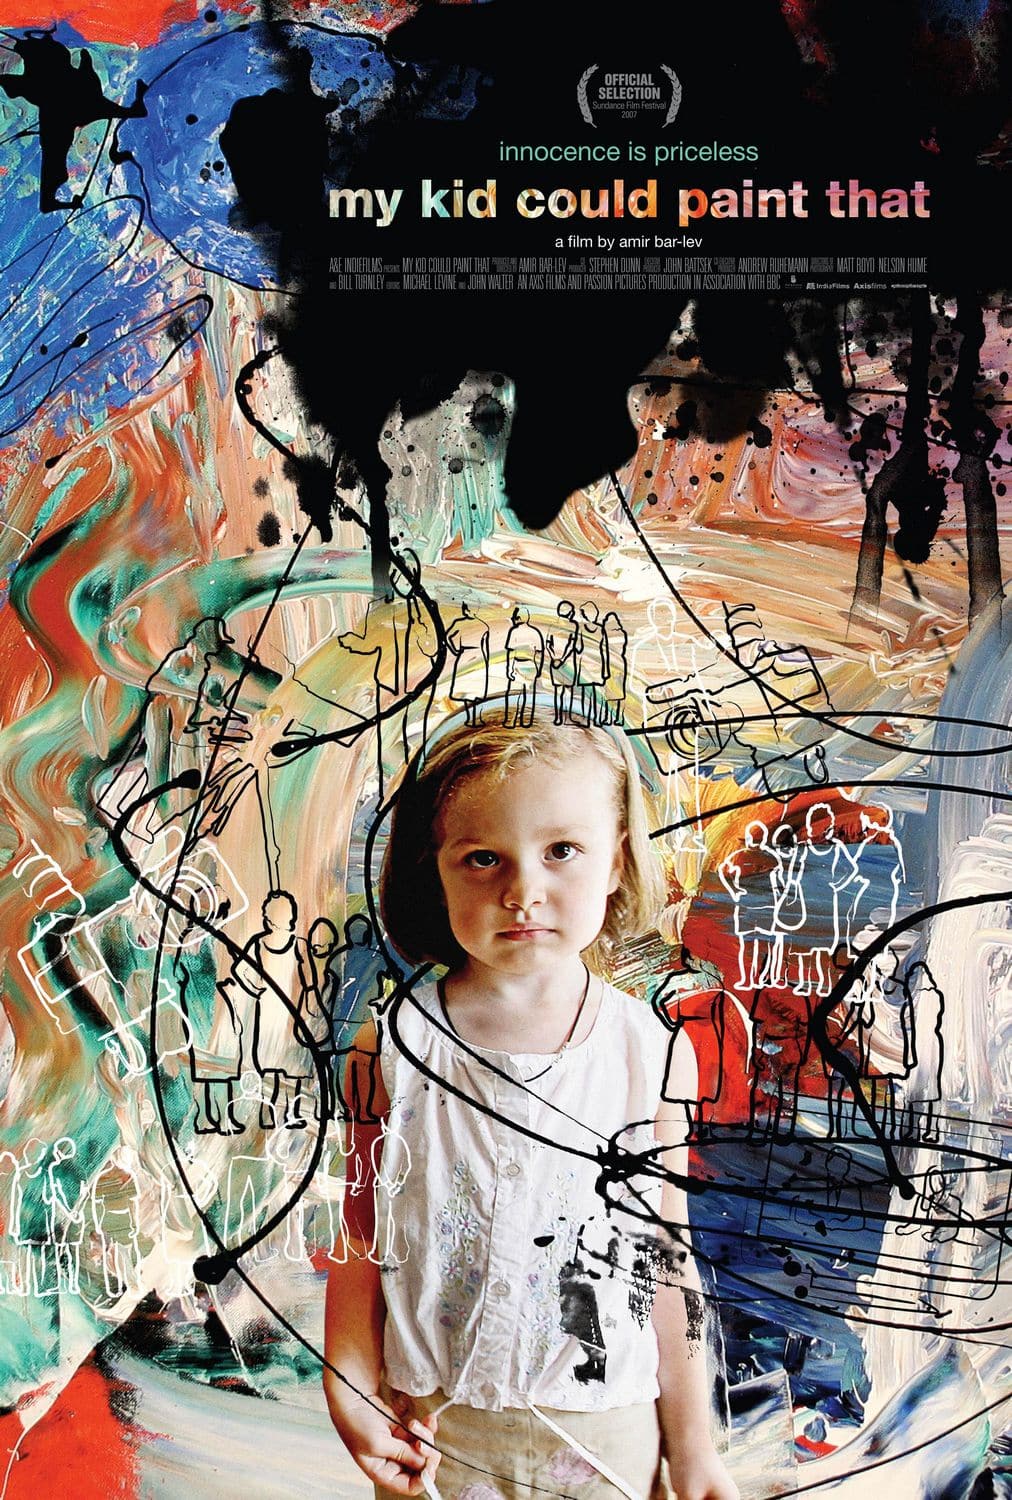 Film Review – My Kid Could Paint That (2007)